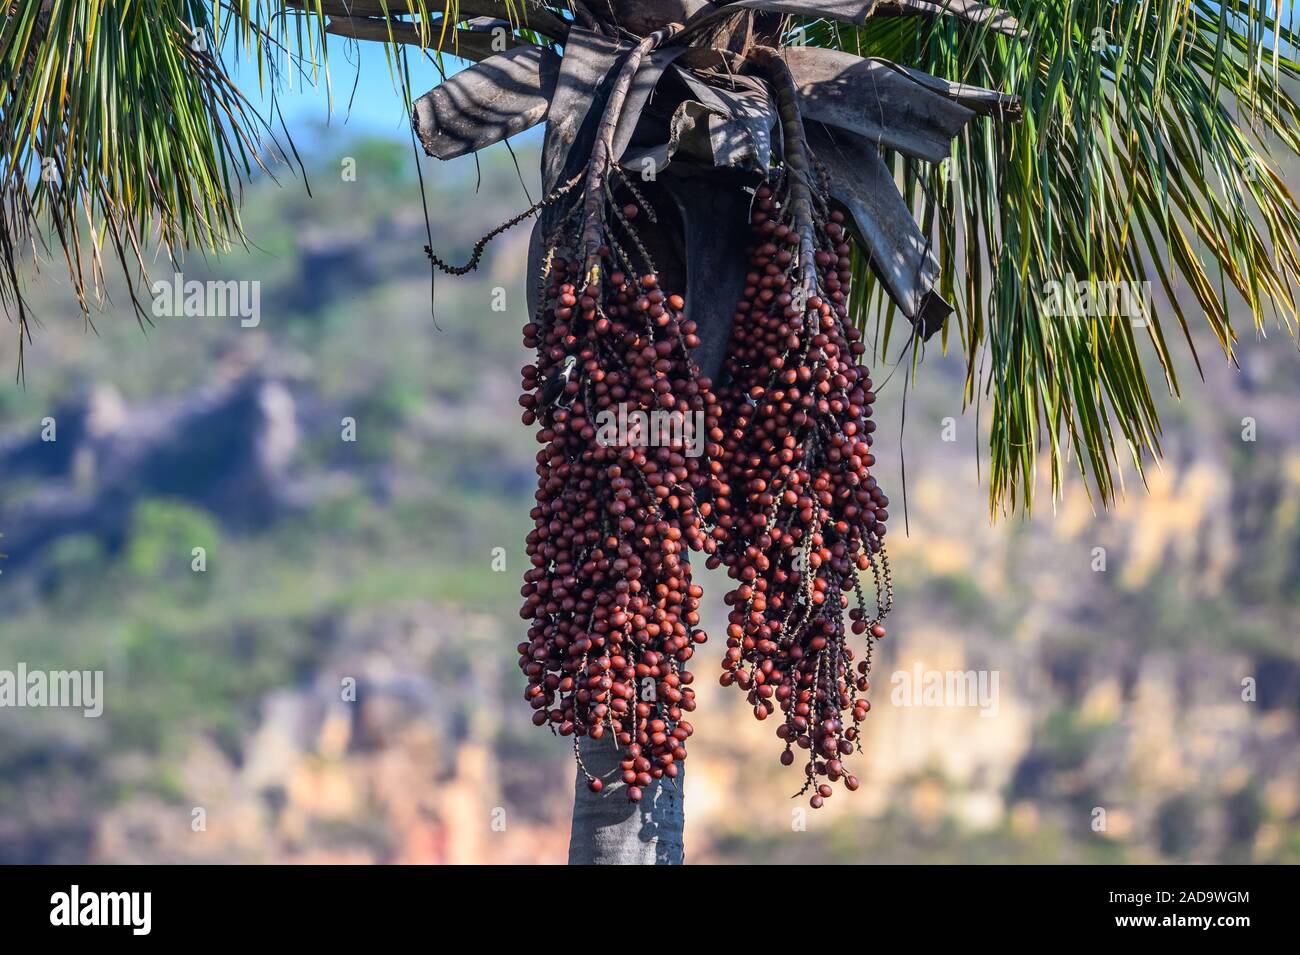 Dark red palm nuts hanging on palm tree. Brazil, South America. Stock Photo